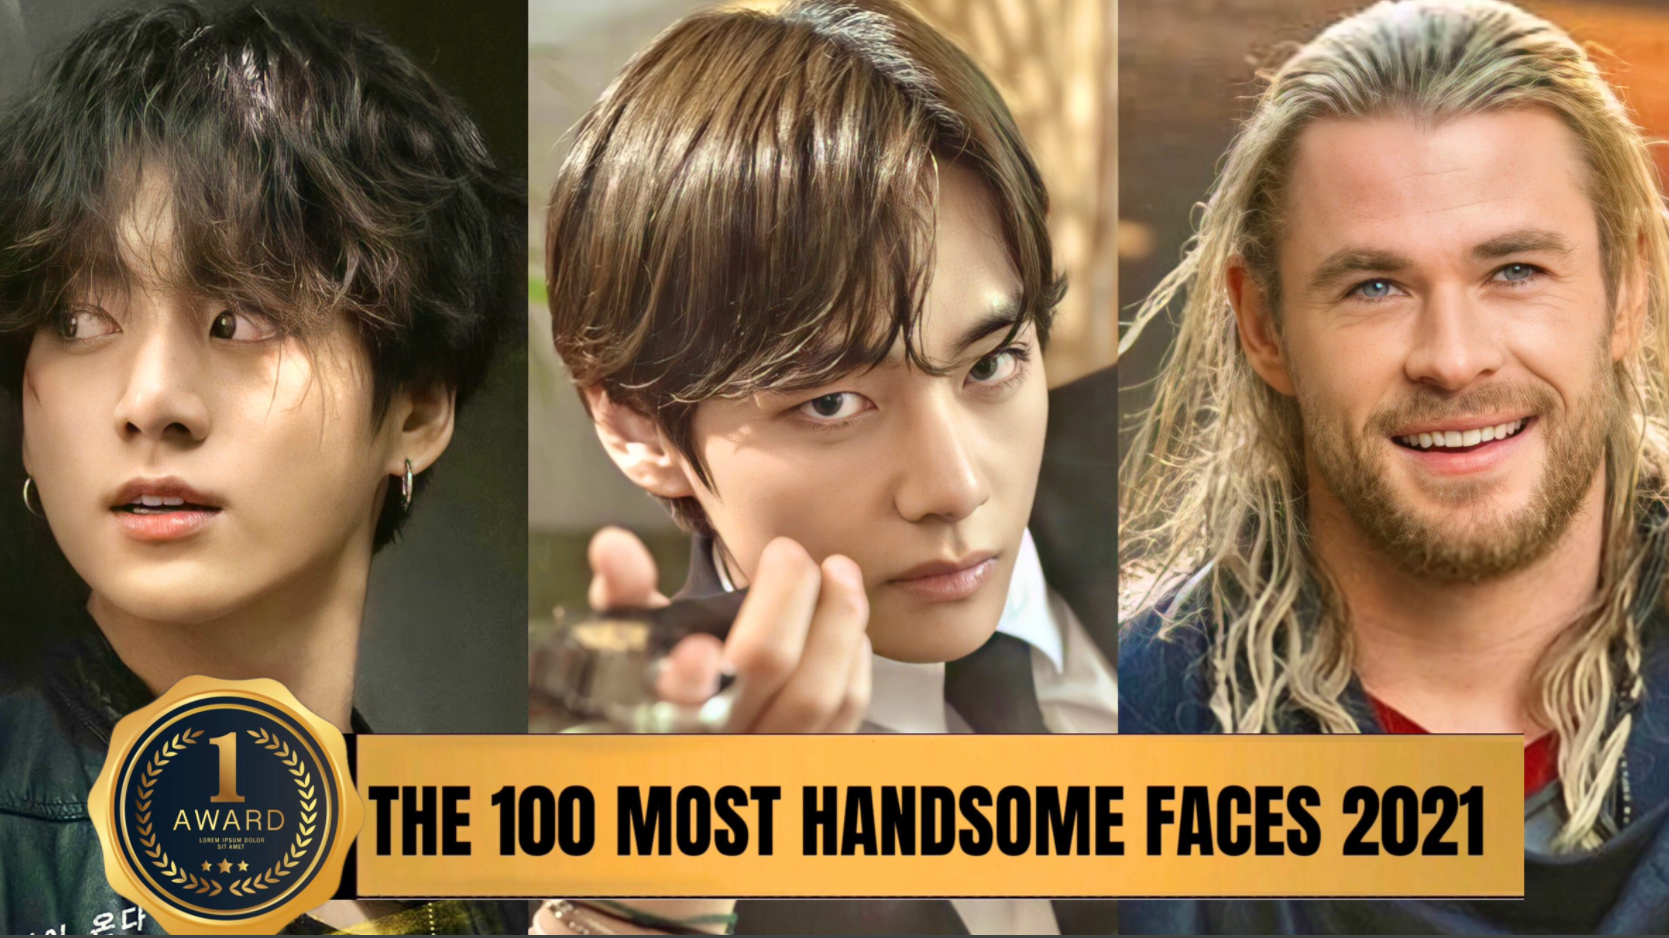 Who Is The Most Handsome Man from Your Country?